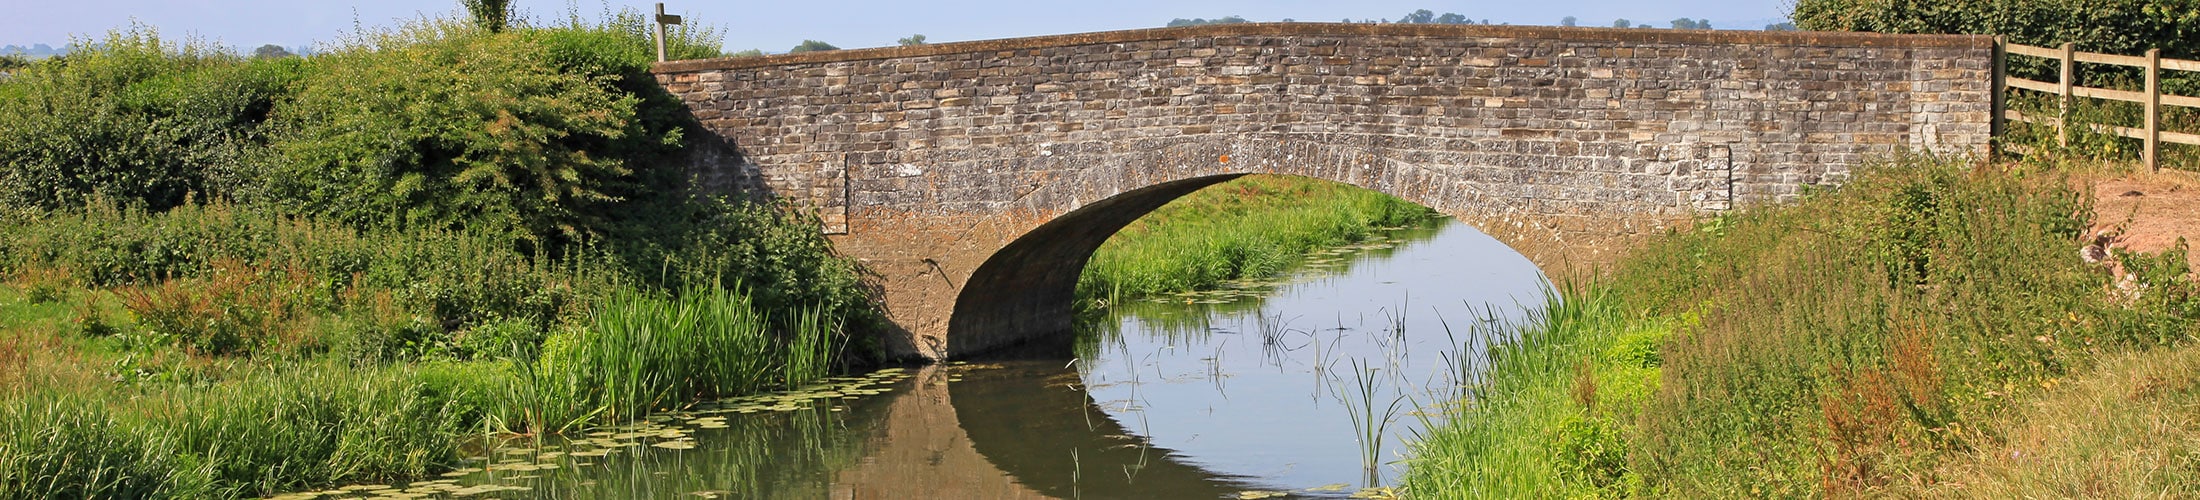 An old stone bridge spans a country river in England